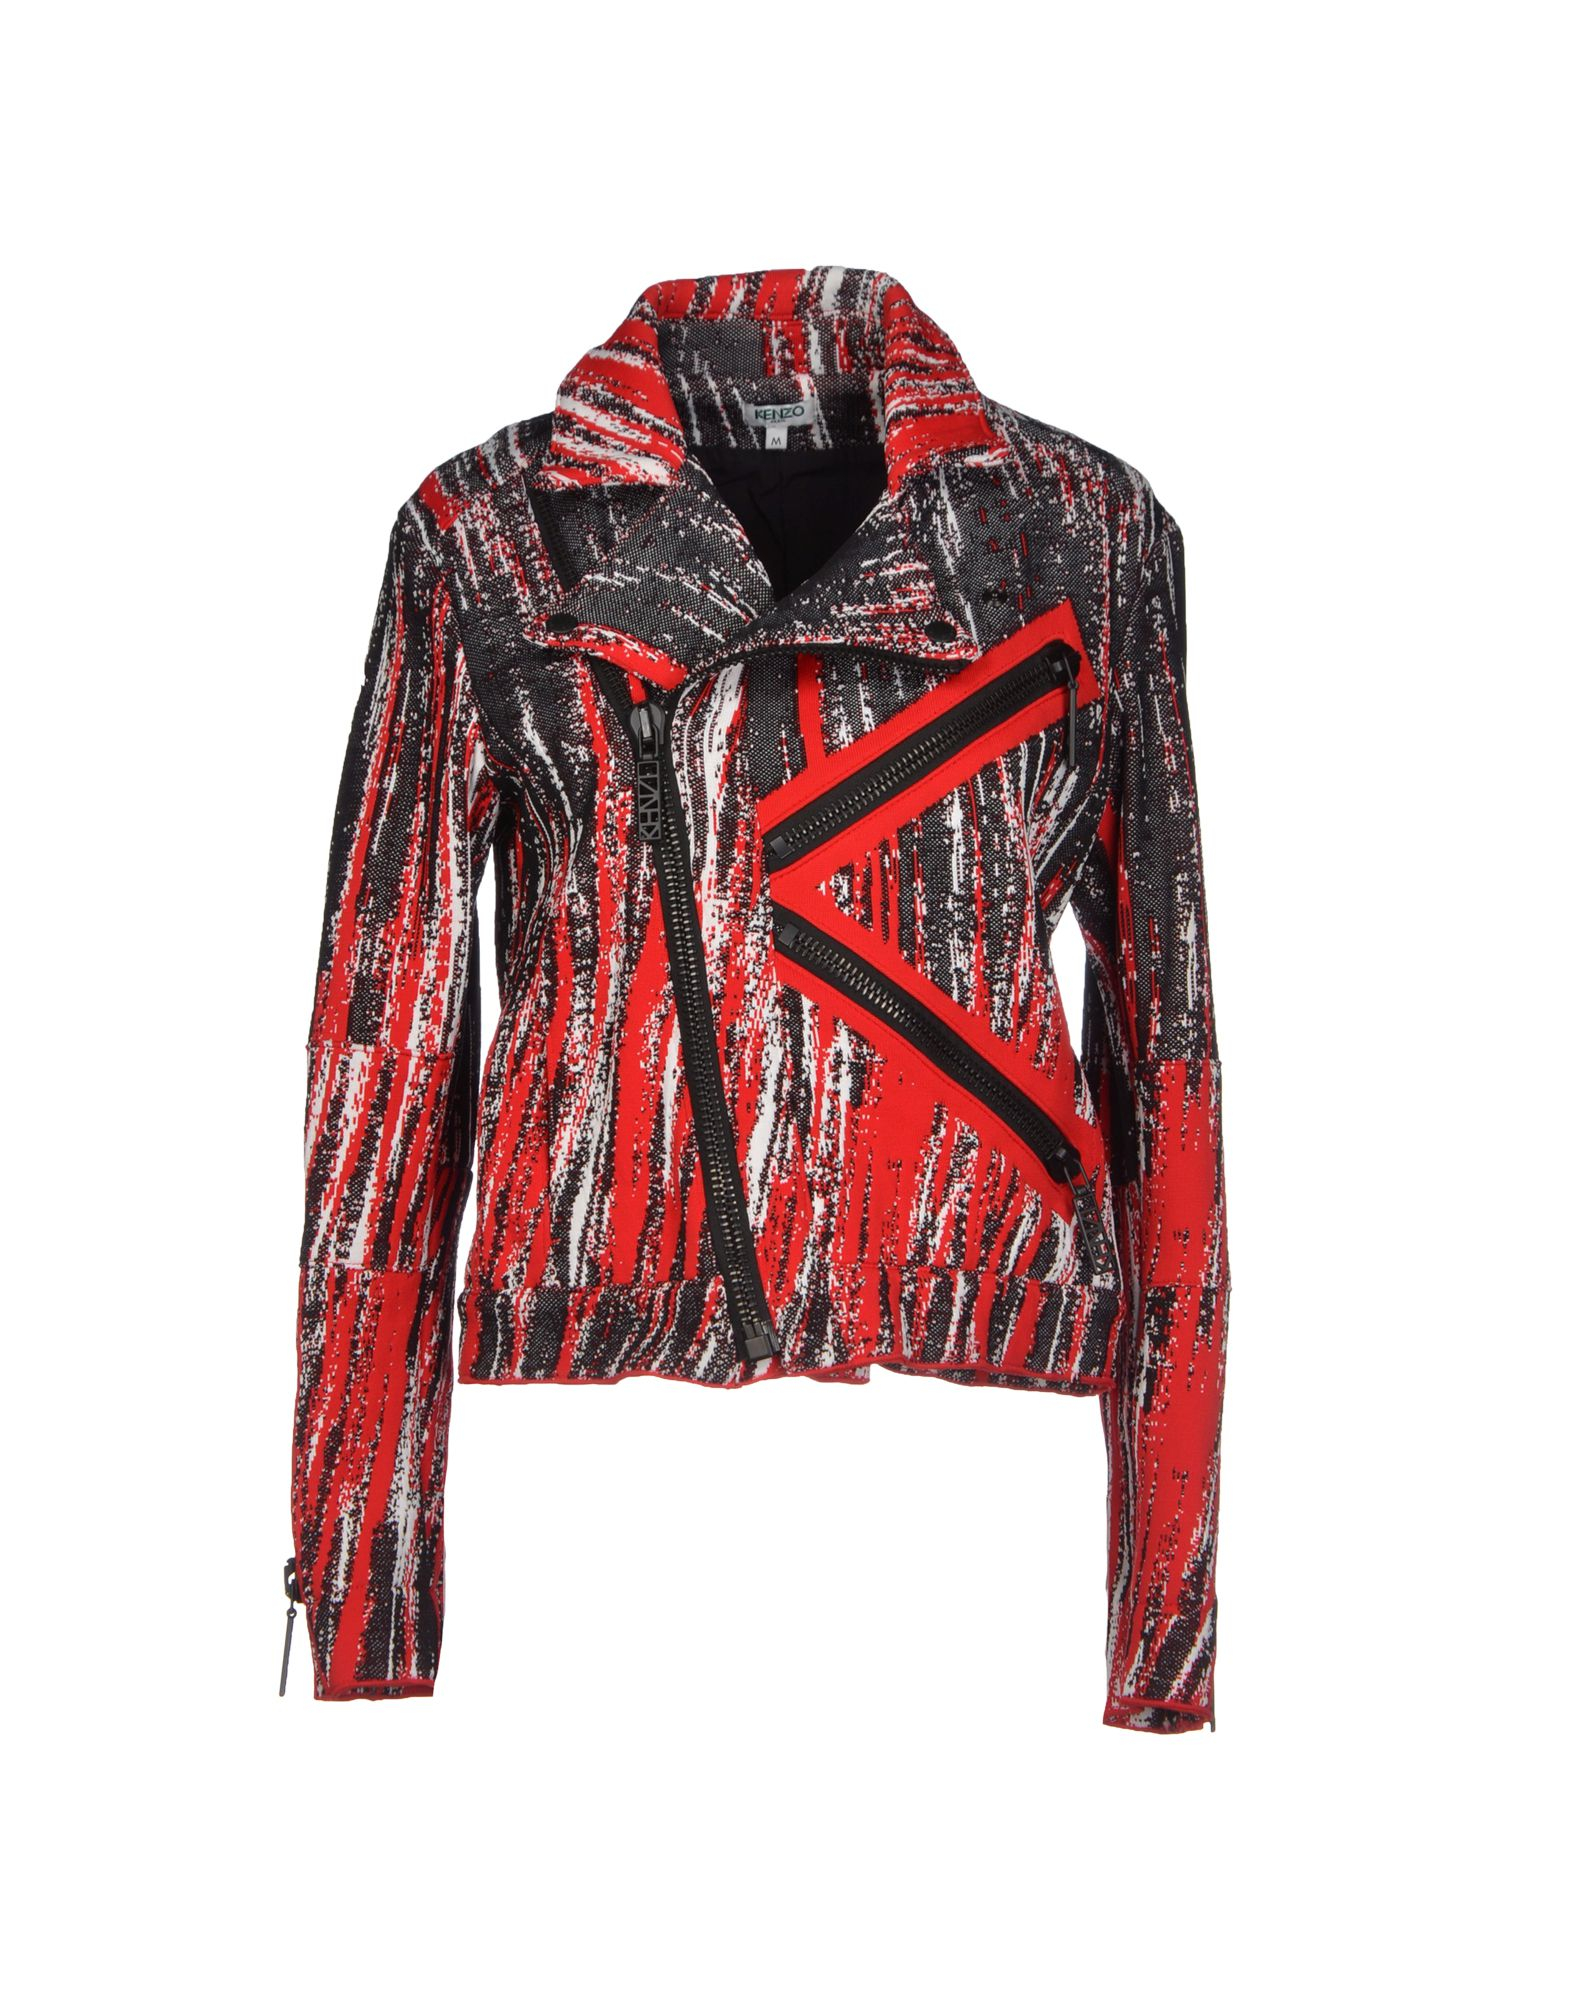 Lyst - Kenzo Jacquard Print Jacket in Red